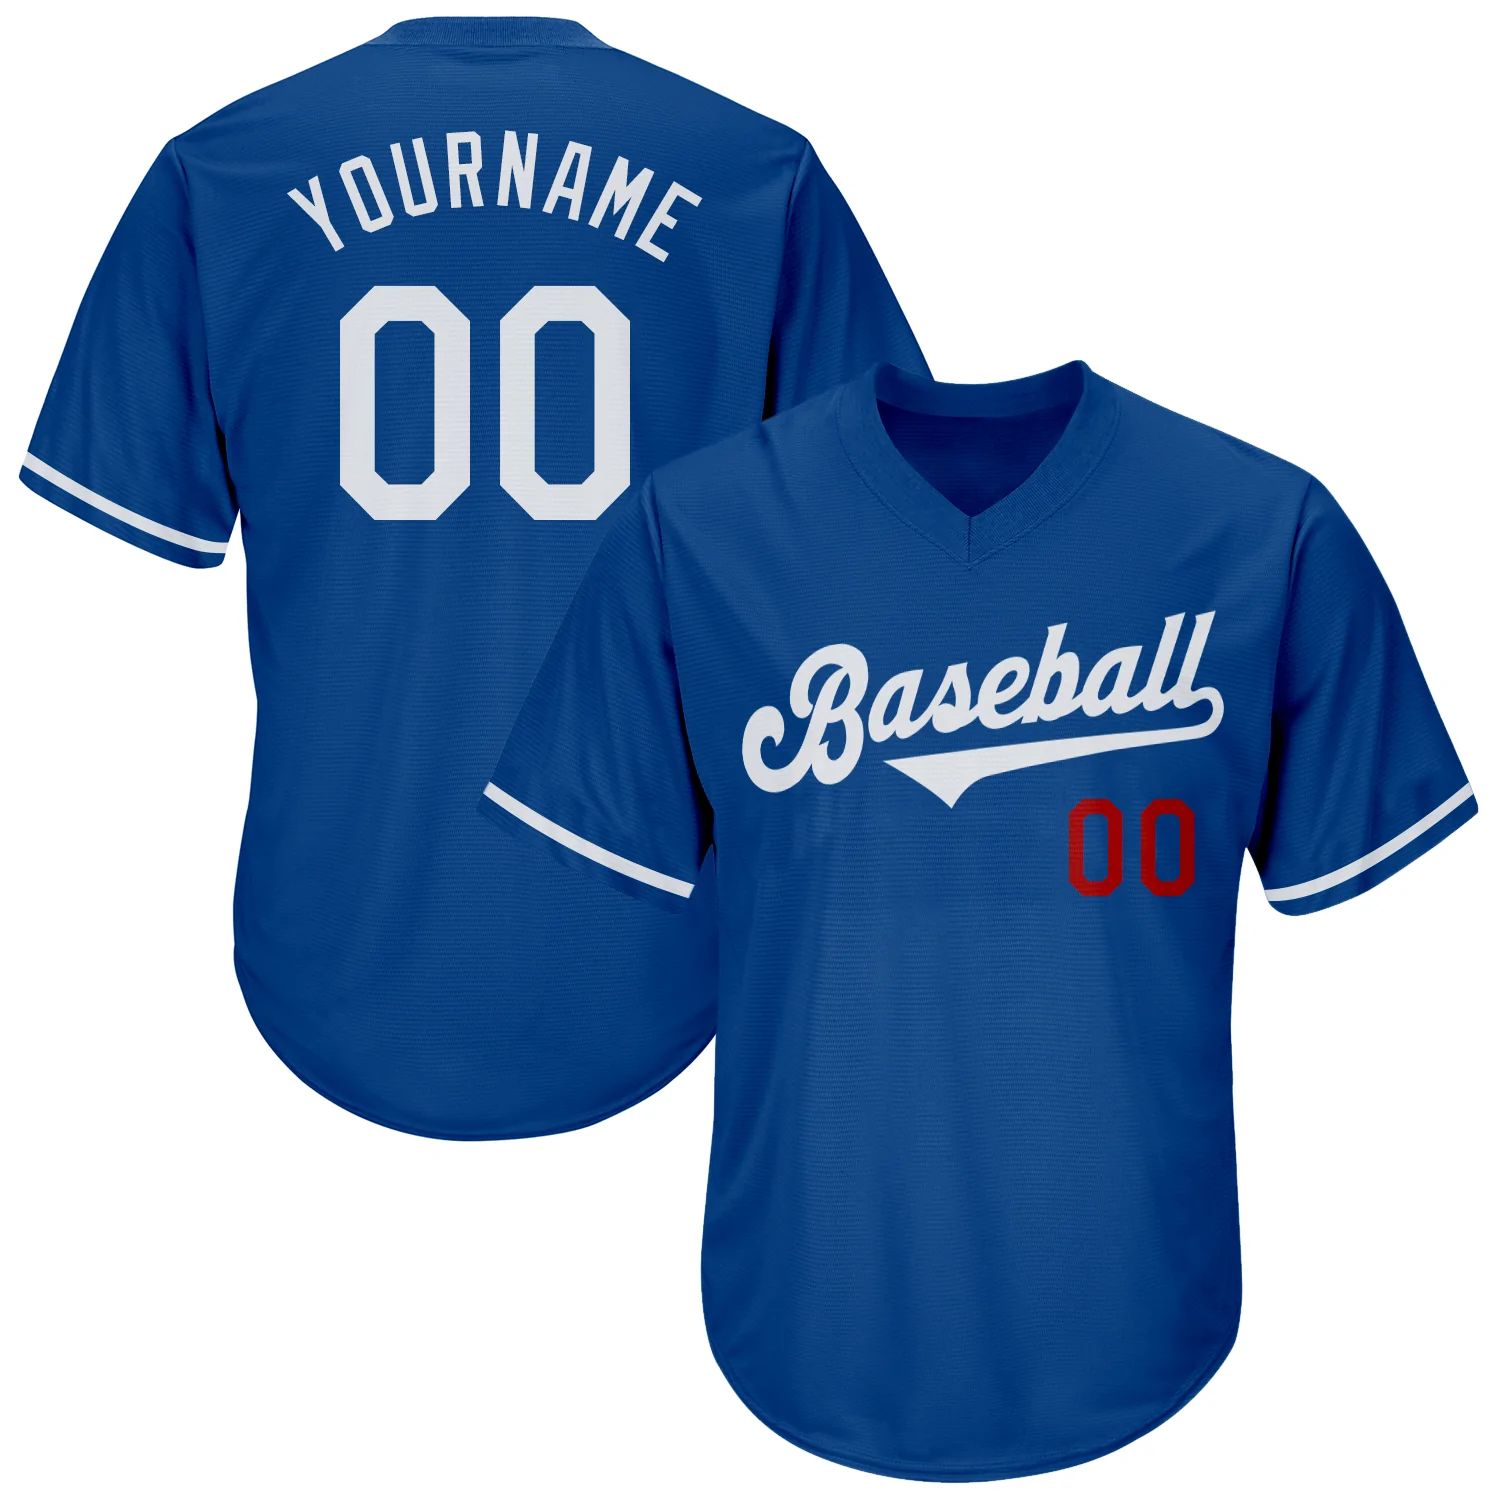 build-red-royal-baseball-white-jersey-authentic-throwback-eroyal00416-online-1.jpg